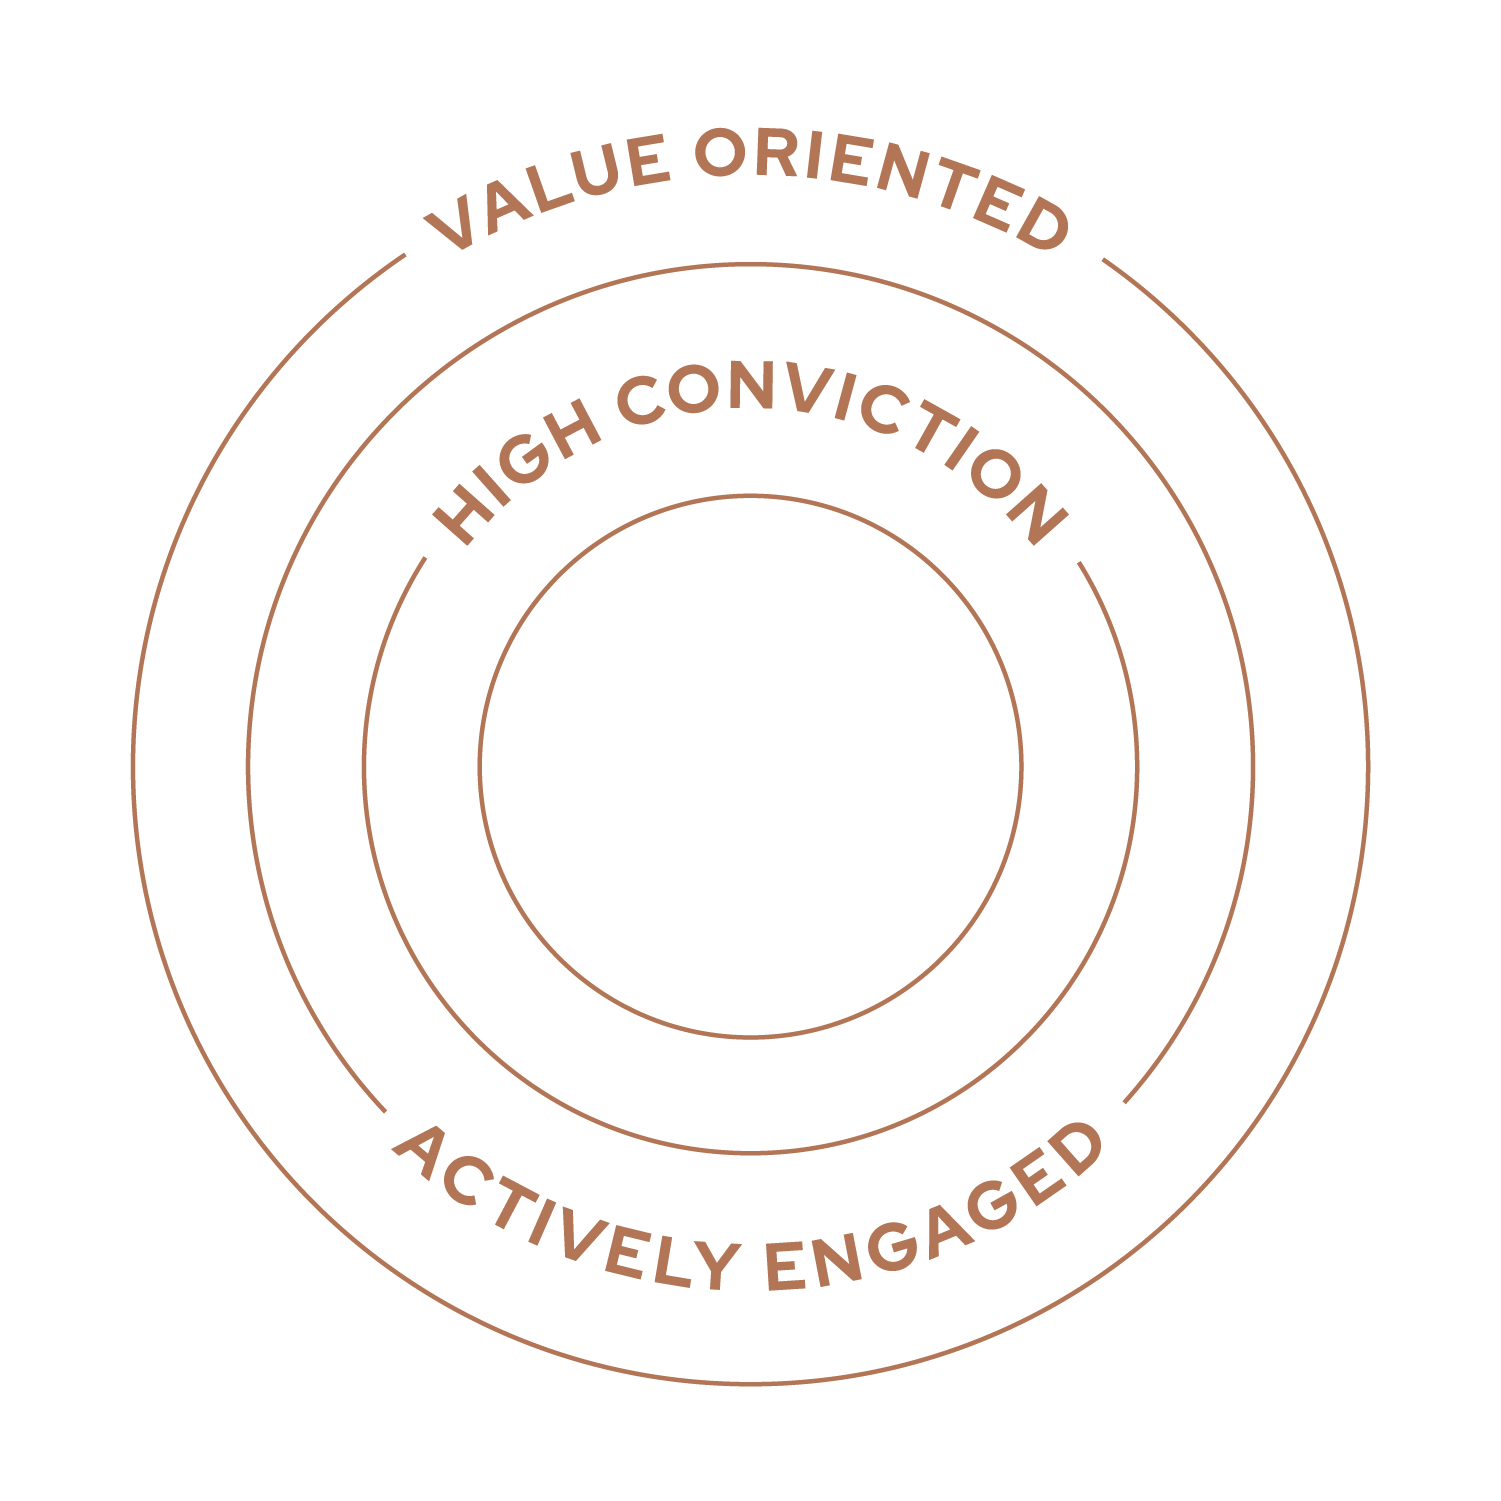 Lanyon principles - Value Oriented, High conviction, Actively engaged